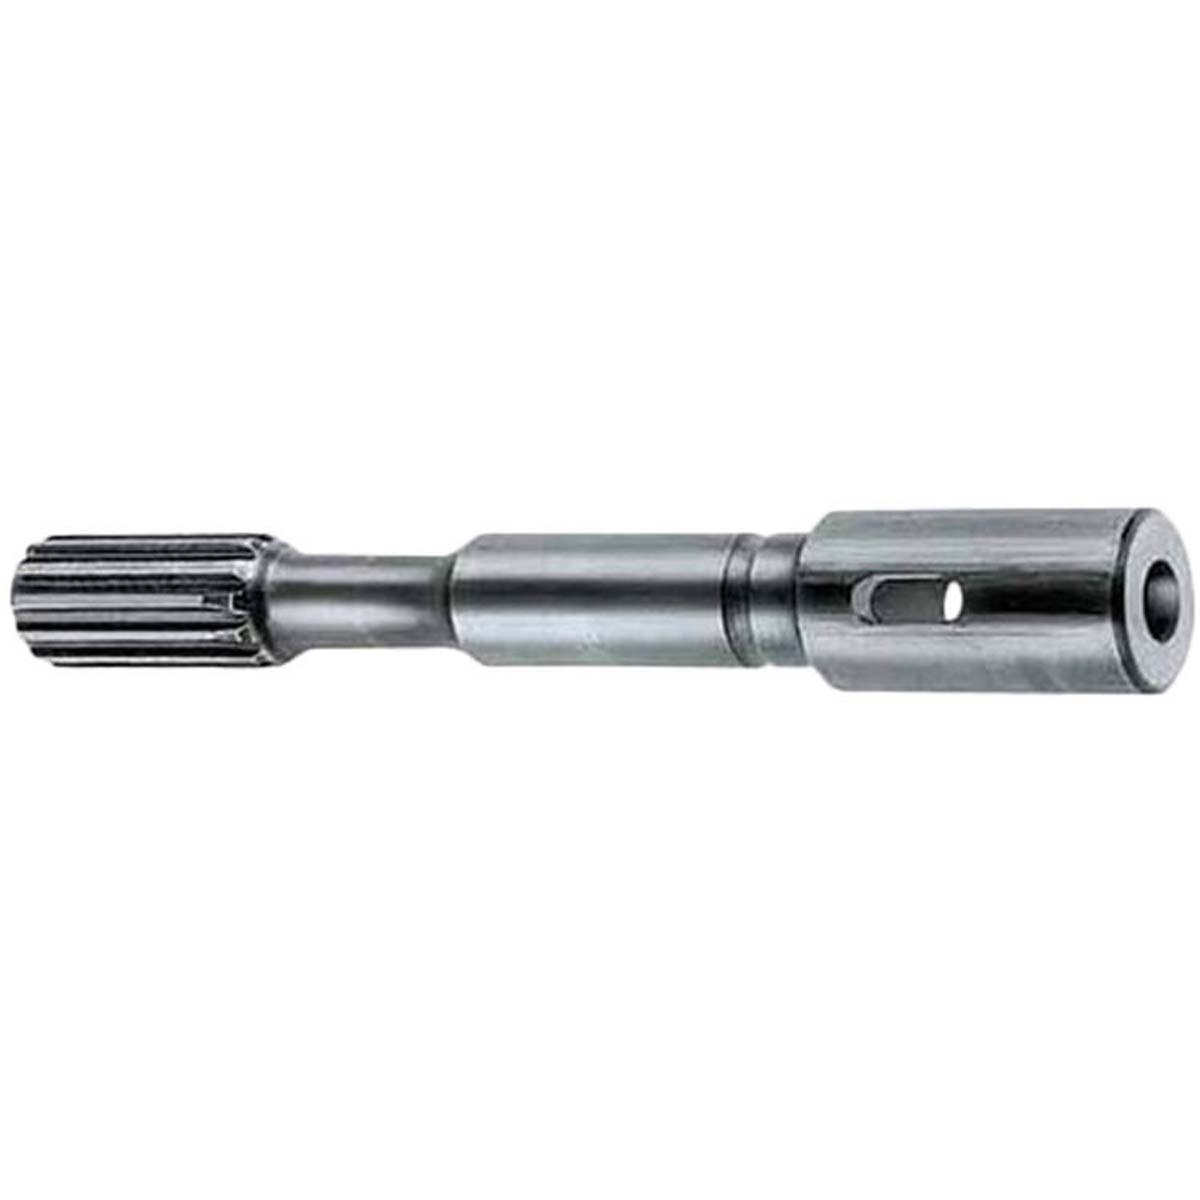 The Milwaukee B taper bit adapter lets you use B taper bits in your spline drive rotary hammer for greater productivity. Get more out of your spline drive rotary hammer, including models 5318-21, 5319-21, 5321-21, 5321-22 and 5345-21, with this heavy...